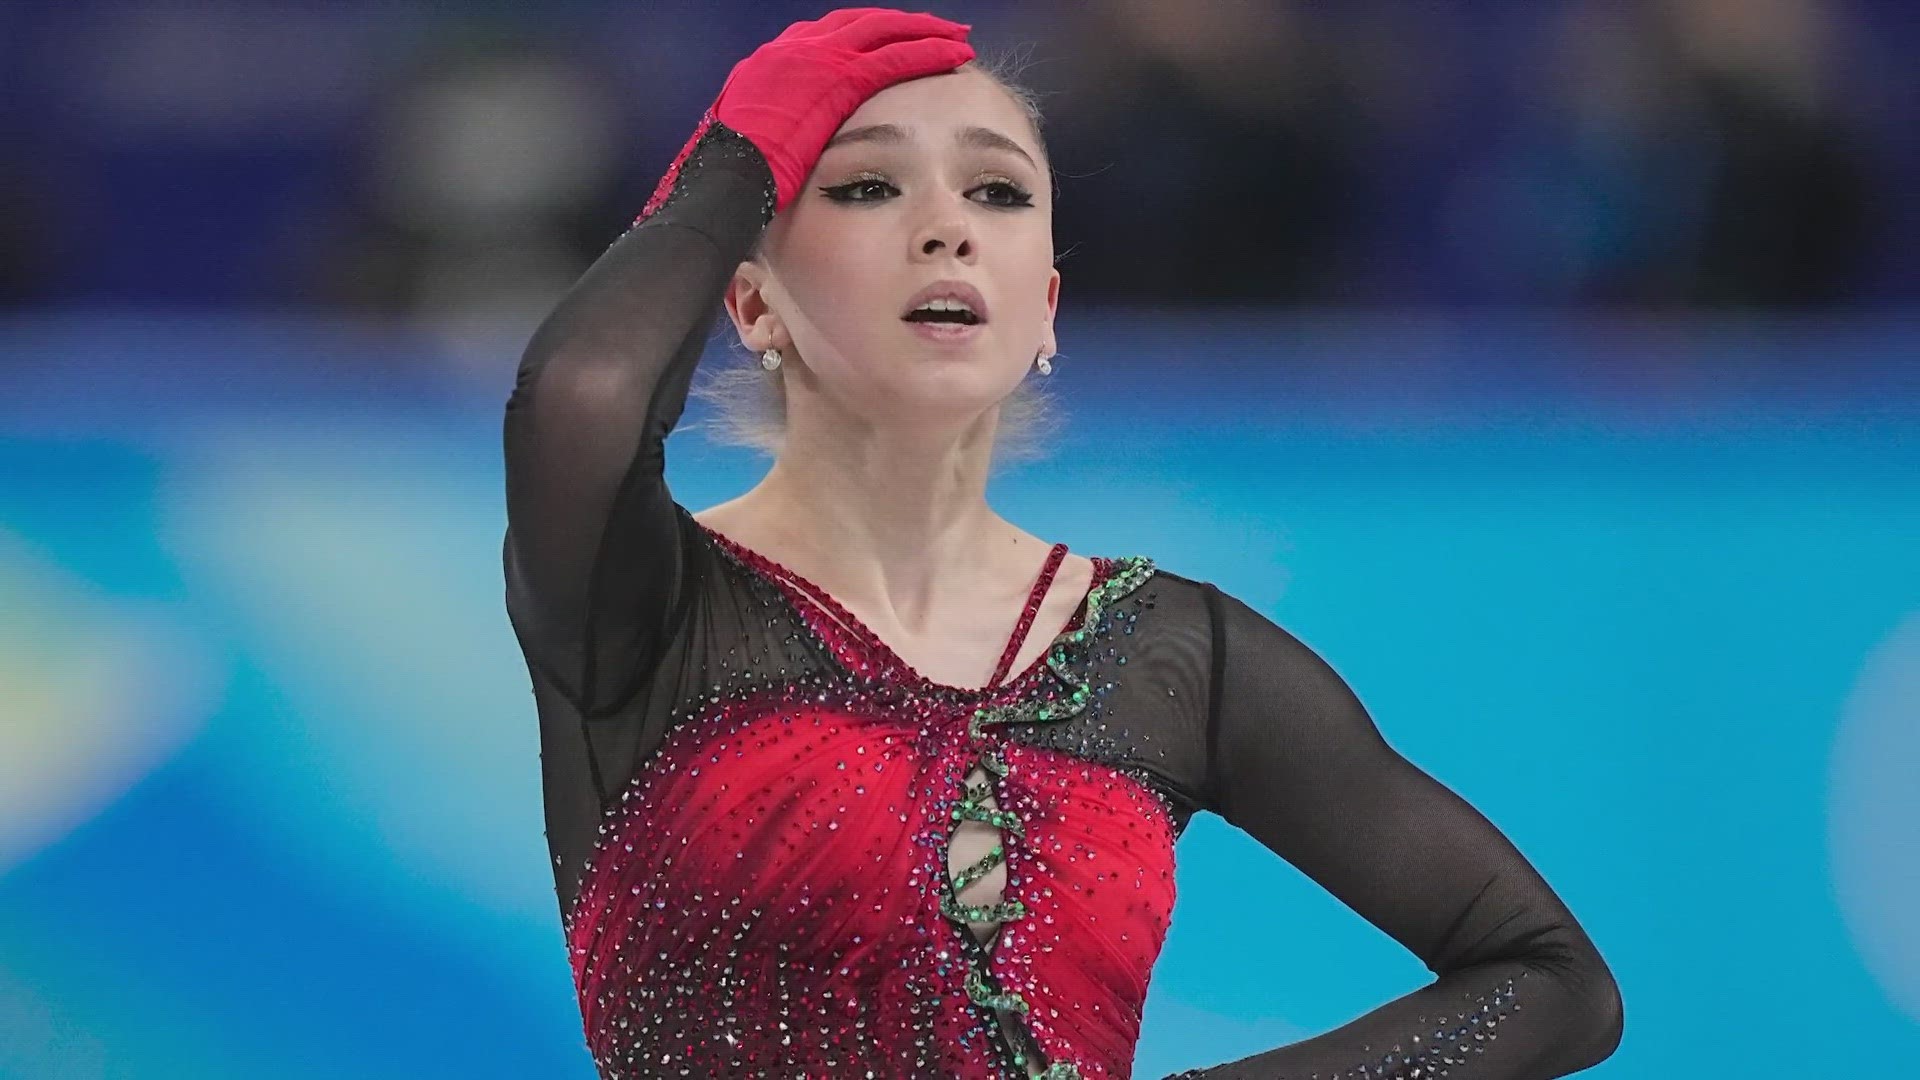 Valieva's case caused turmoil during the 2022 Olympics when she tested positive for a banned heart medicine.